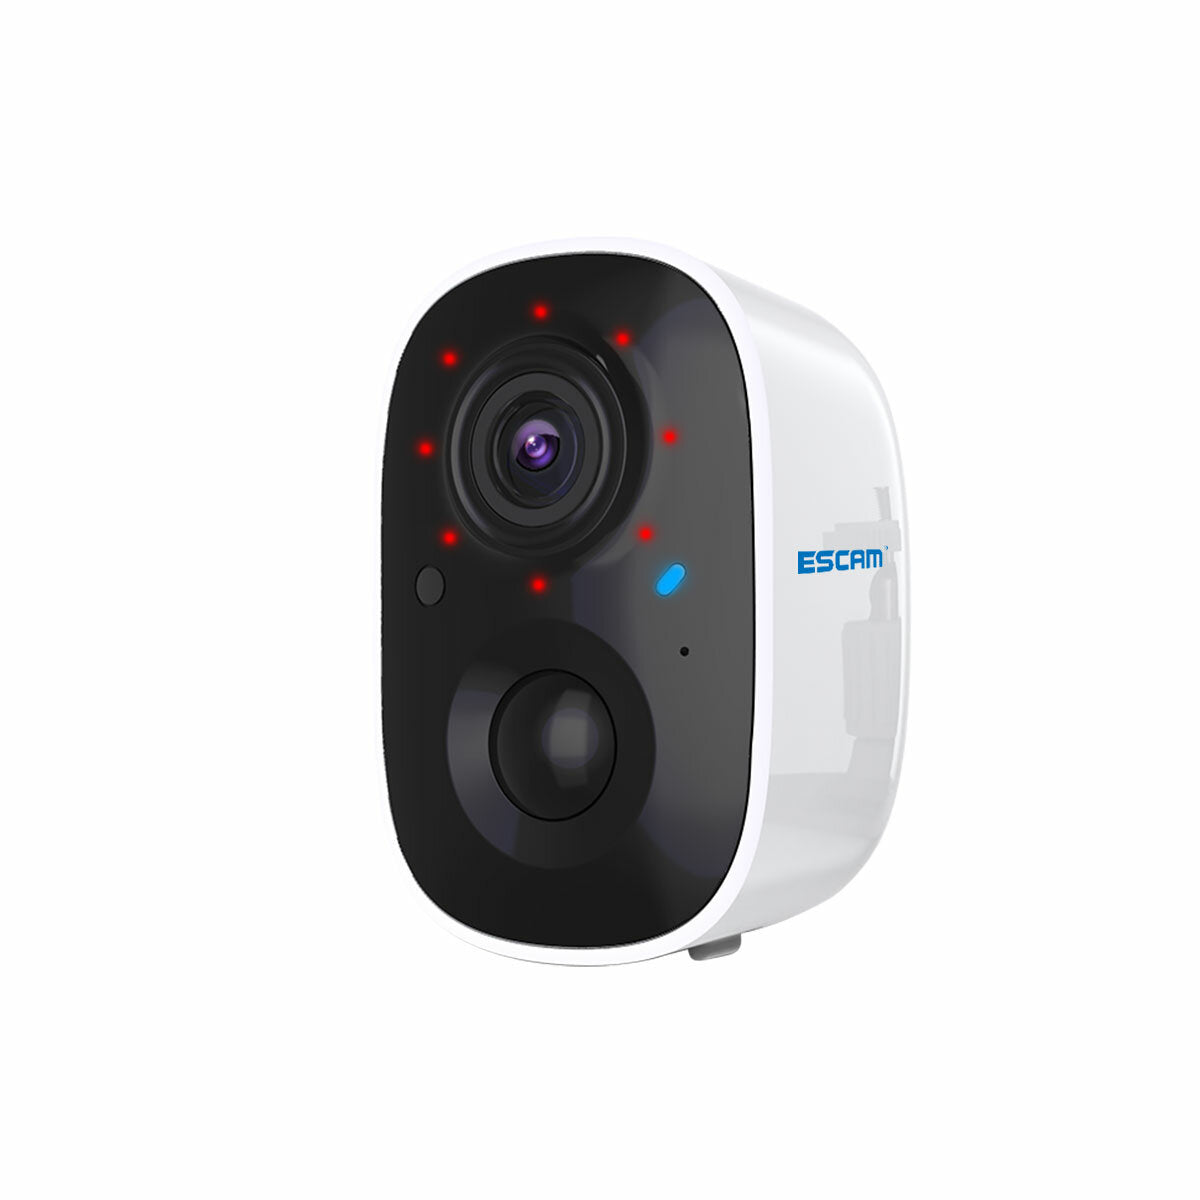 1080P Full HD AI Recognition PIR Alarm Cloud Storage WiFi Camera Built in 5200mAH Rechargeable Battery